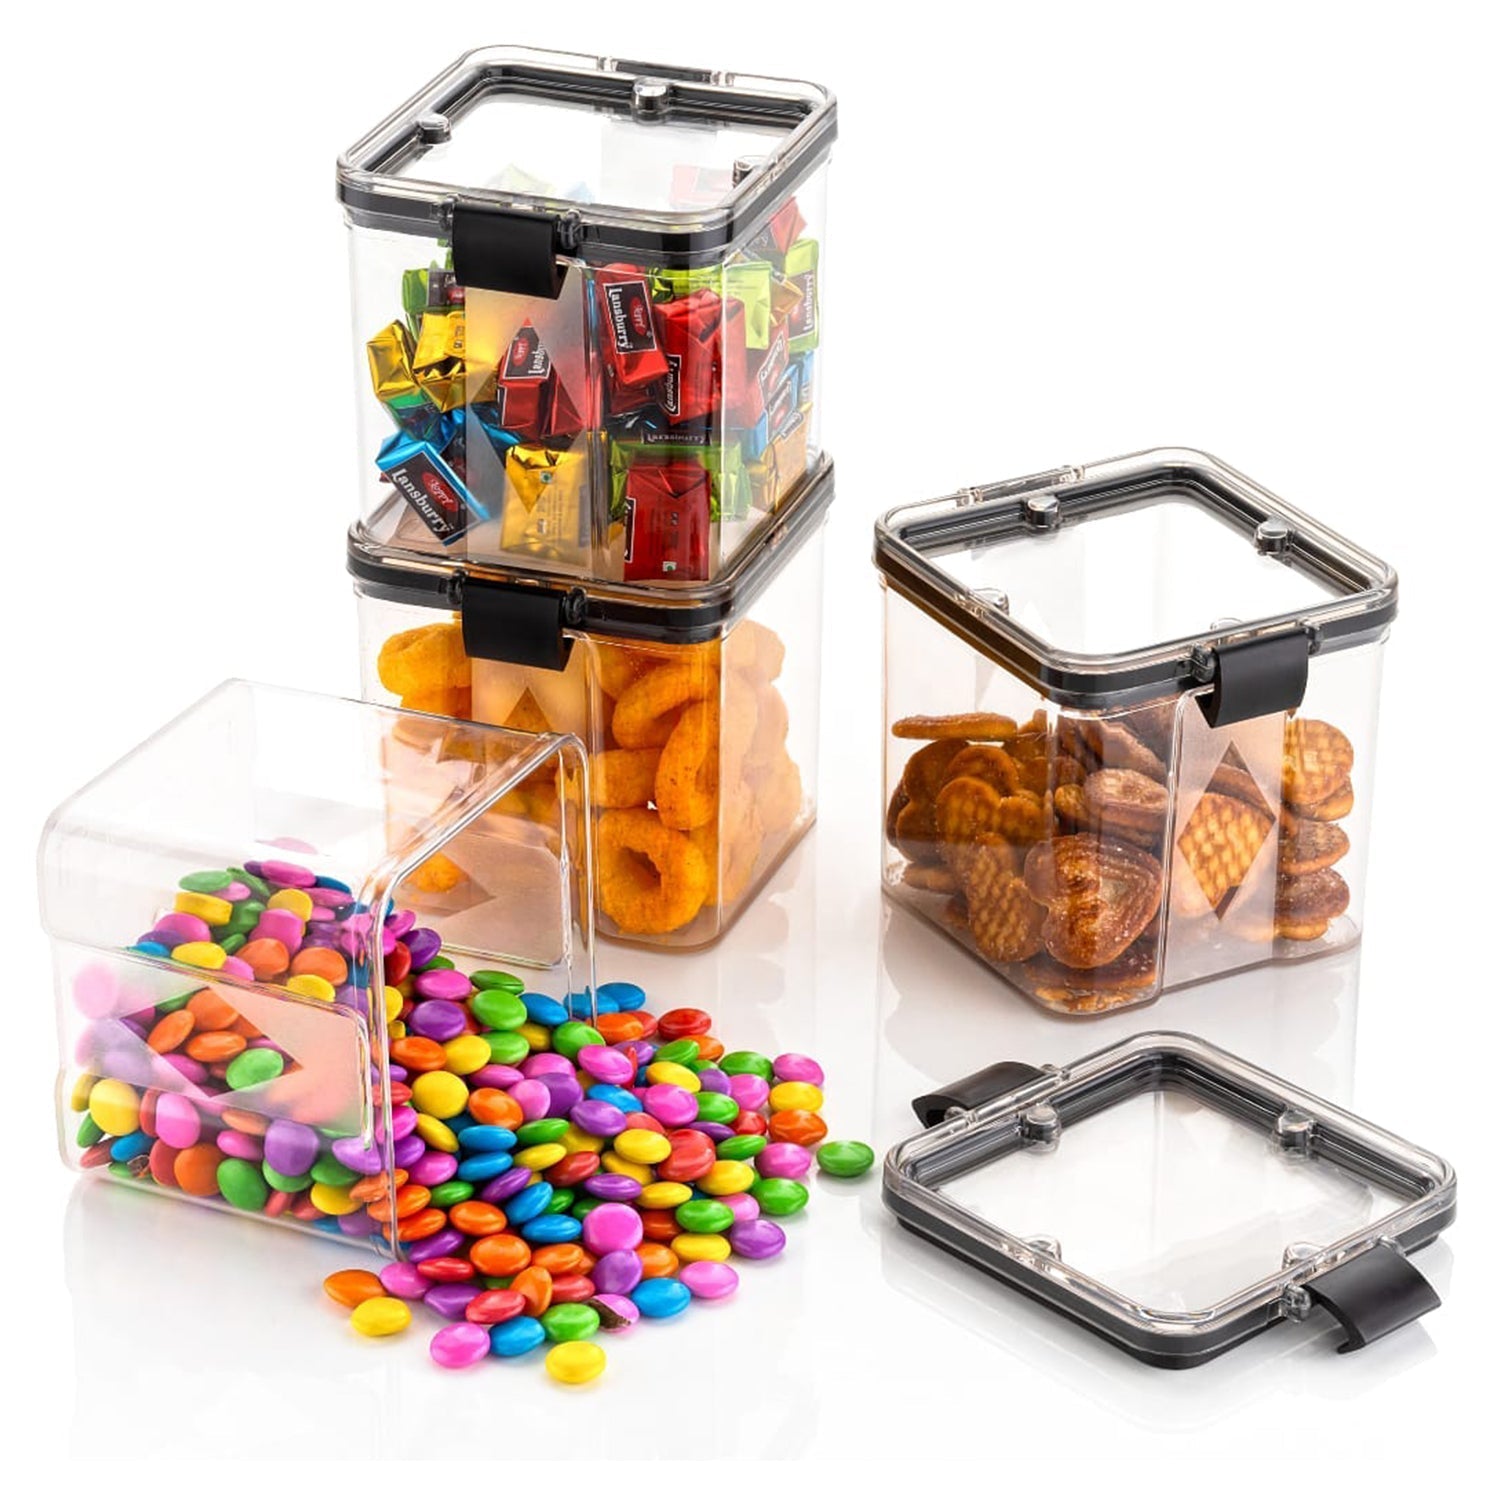 2763 4Pc Square Container 700Ml Used For Storing Types Of Food Stuffs And Items.